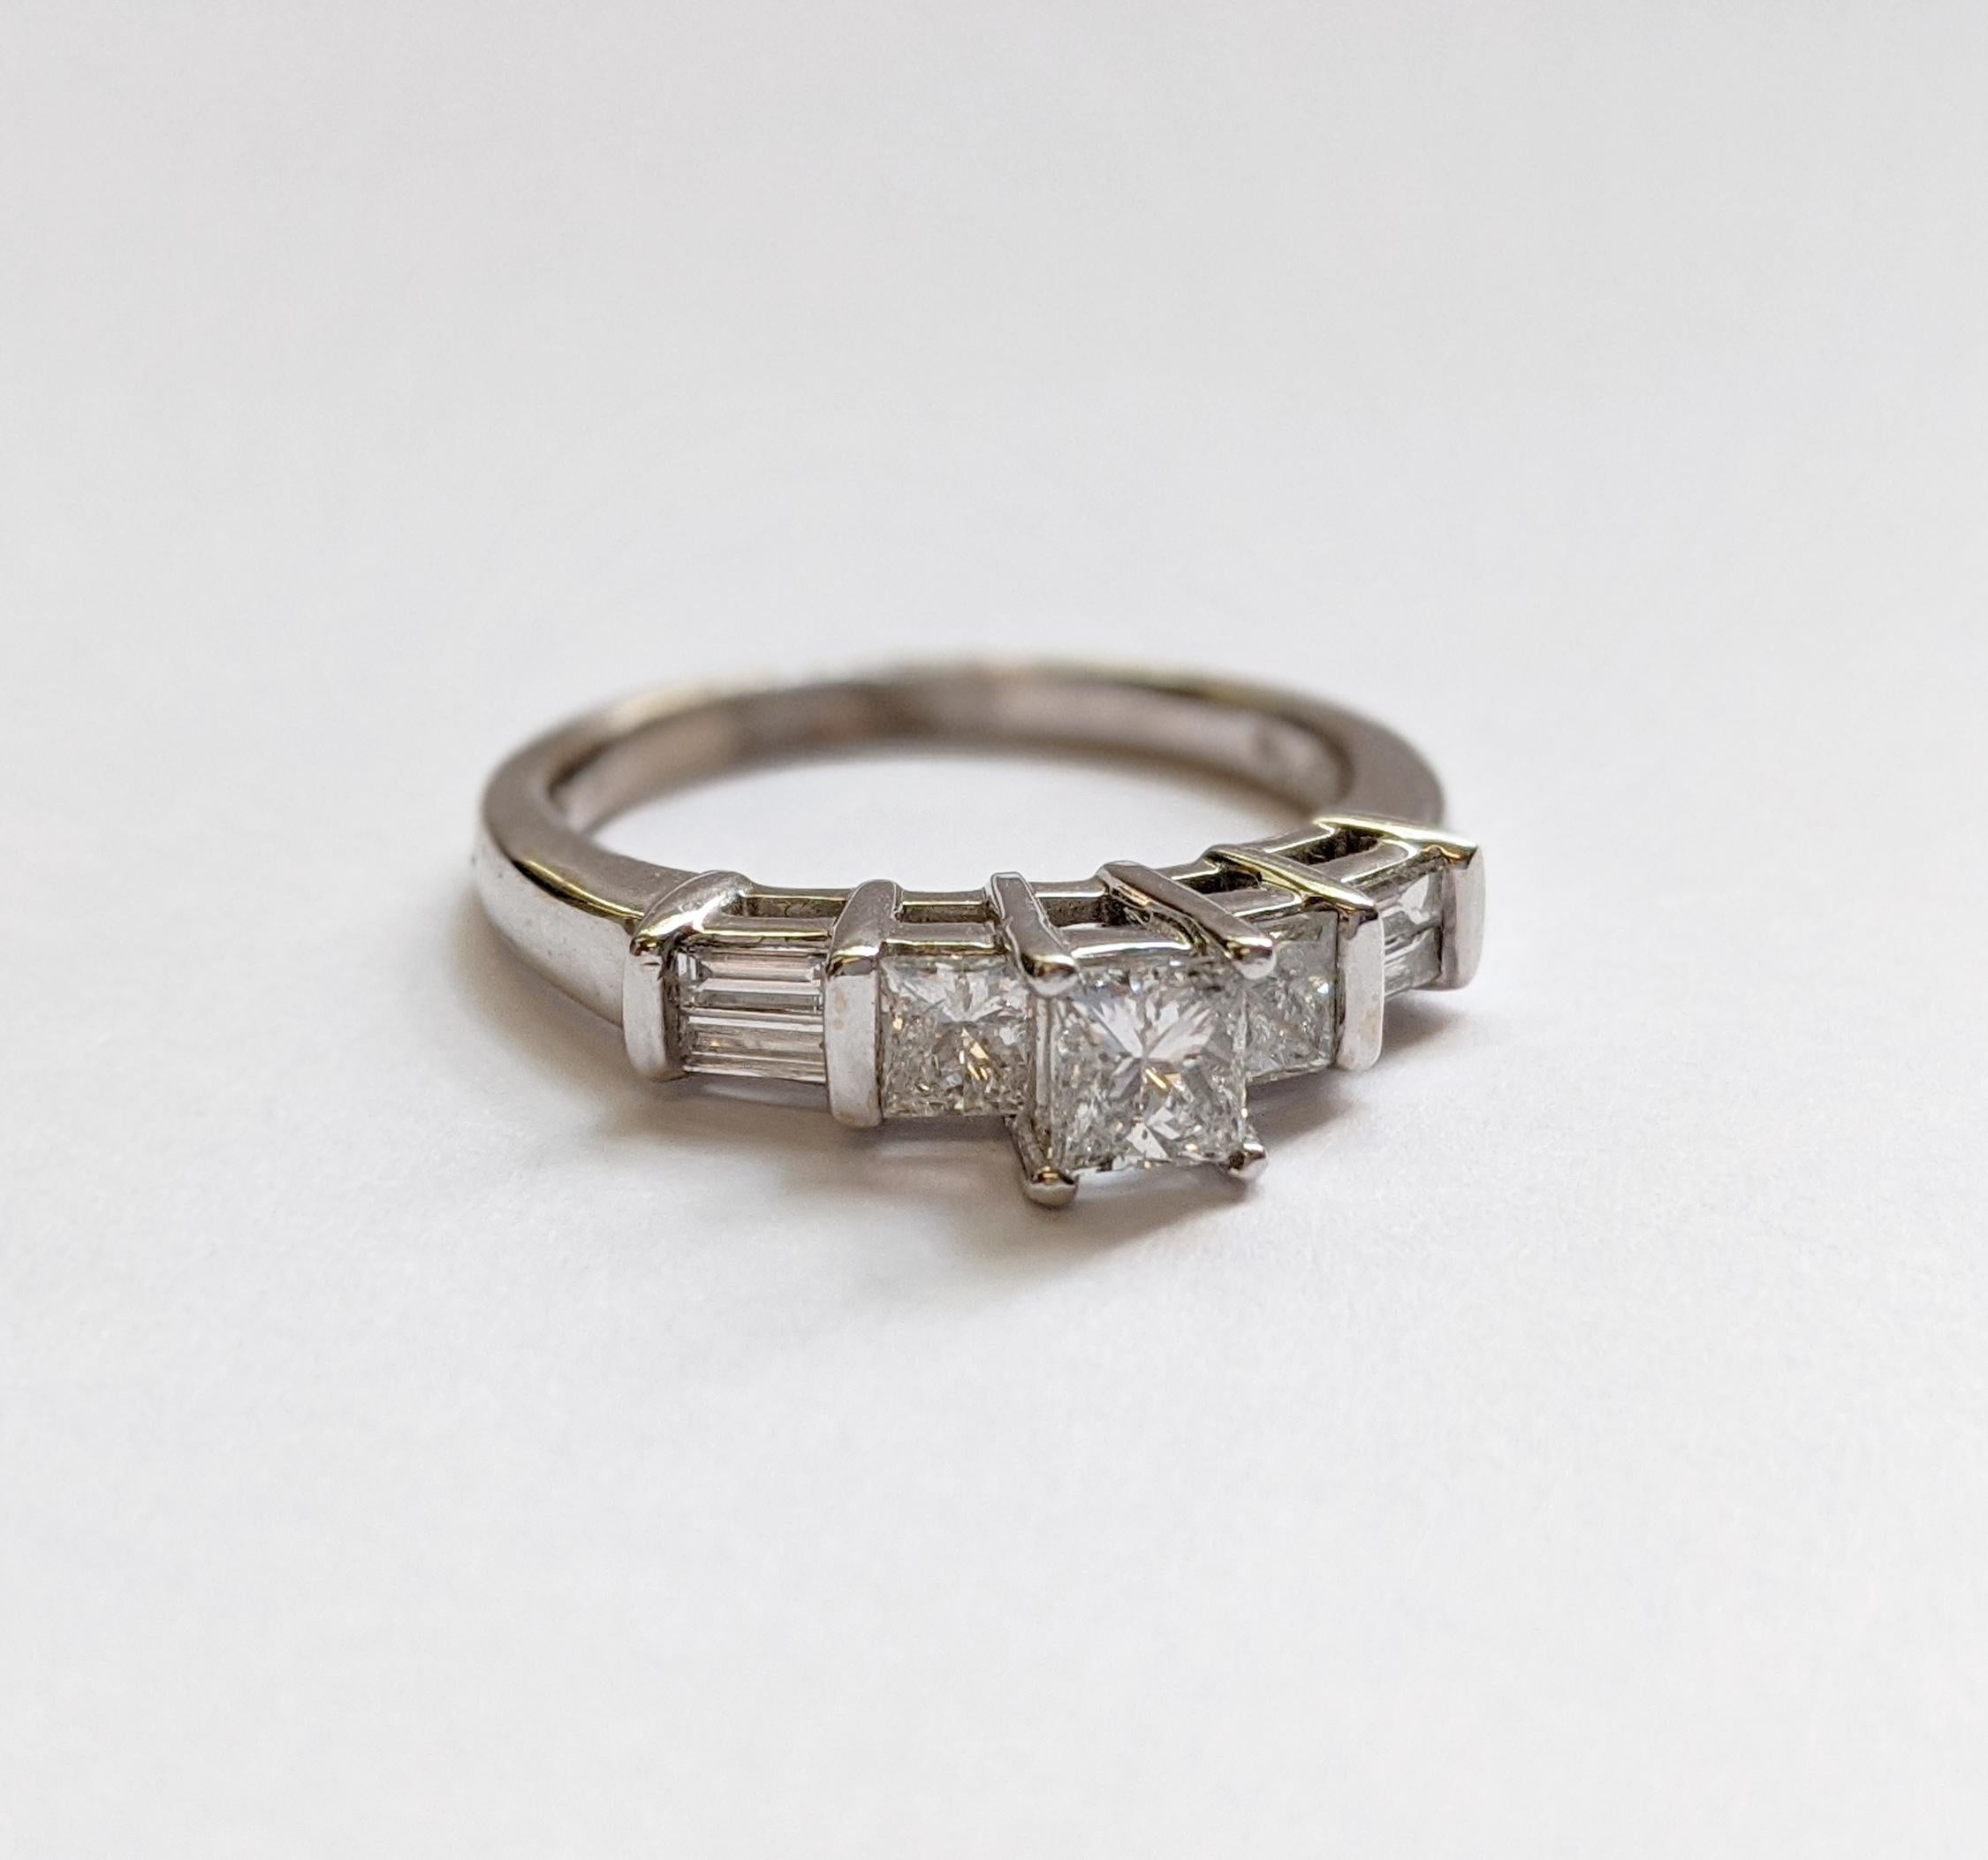 This ring will make any modern-day princess gleam. This contemporary engagement ring features a princess-cut diamond in the center.  Two princess cut and four baguette diamonds on either side frame the center stone. Fashioned in polished 14K white